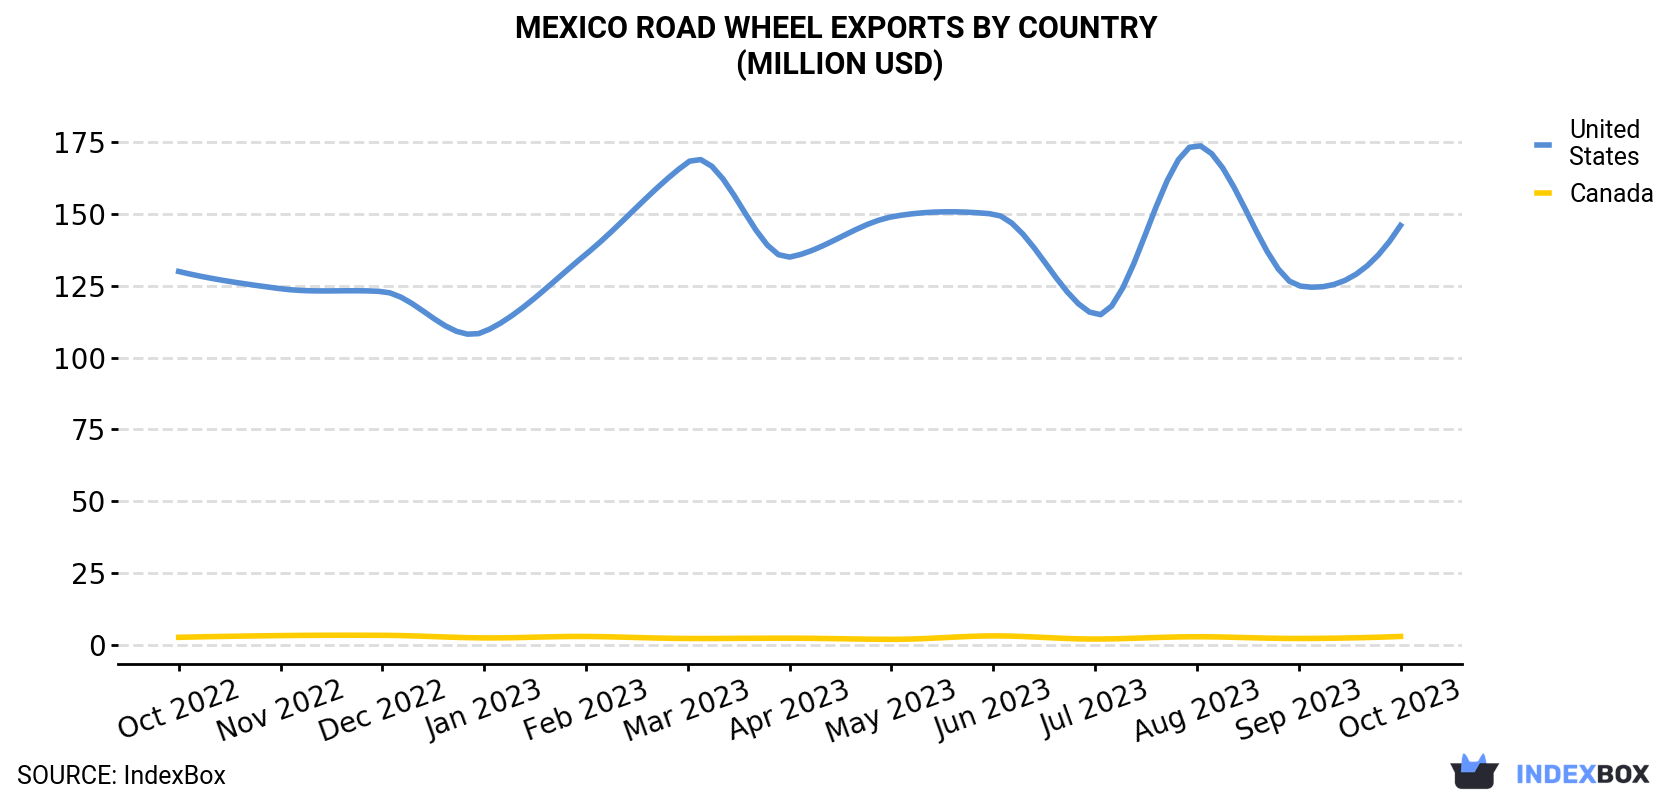 Mexico Road Wheel Exports By Country (Million USD)